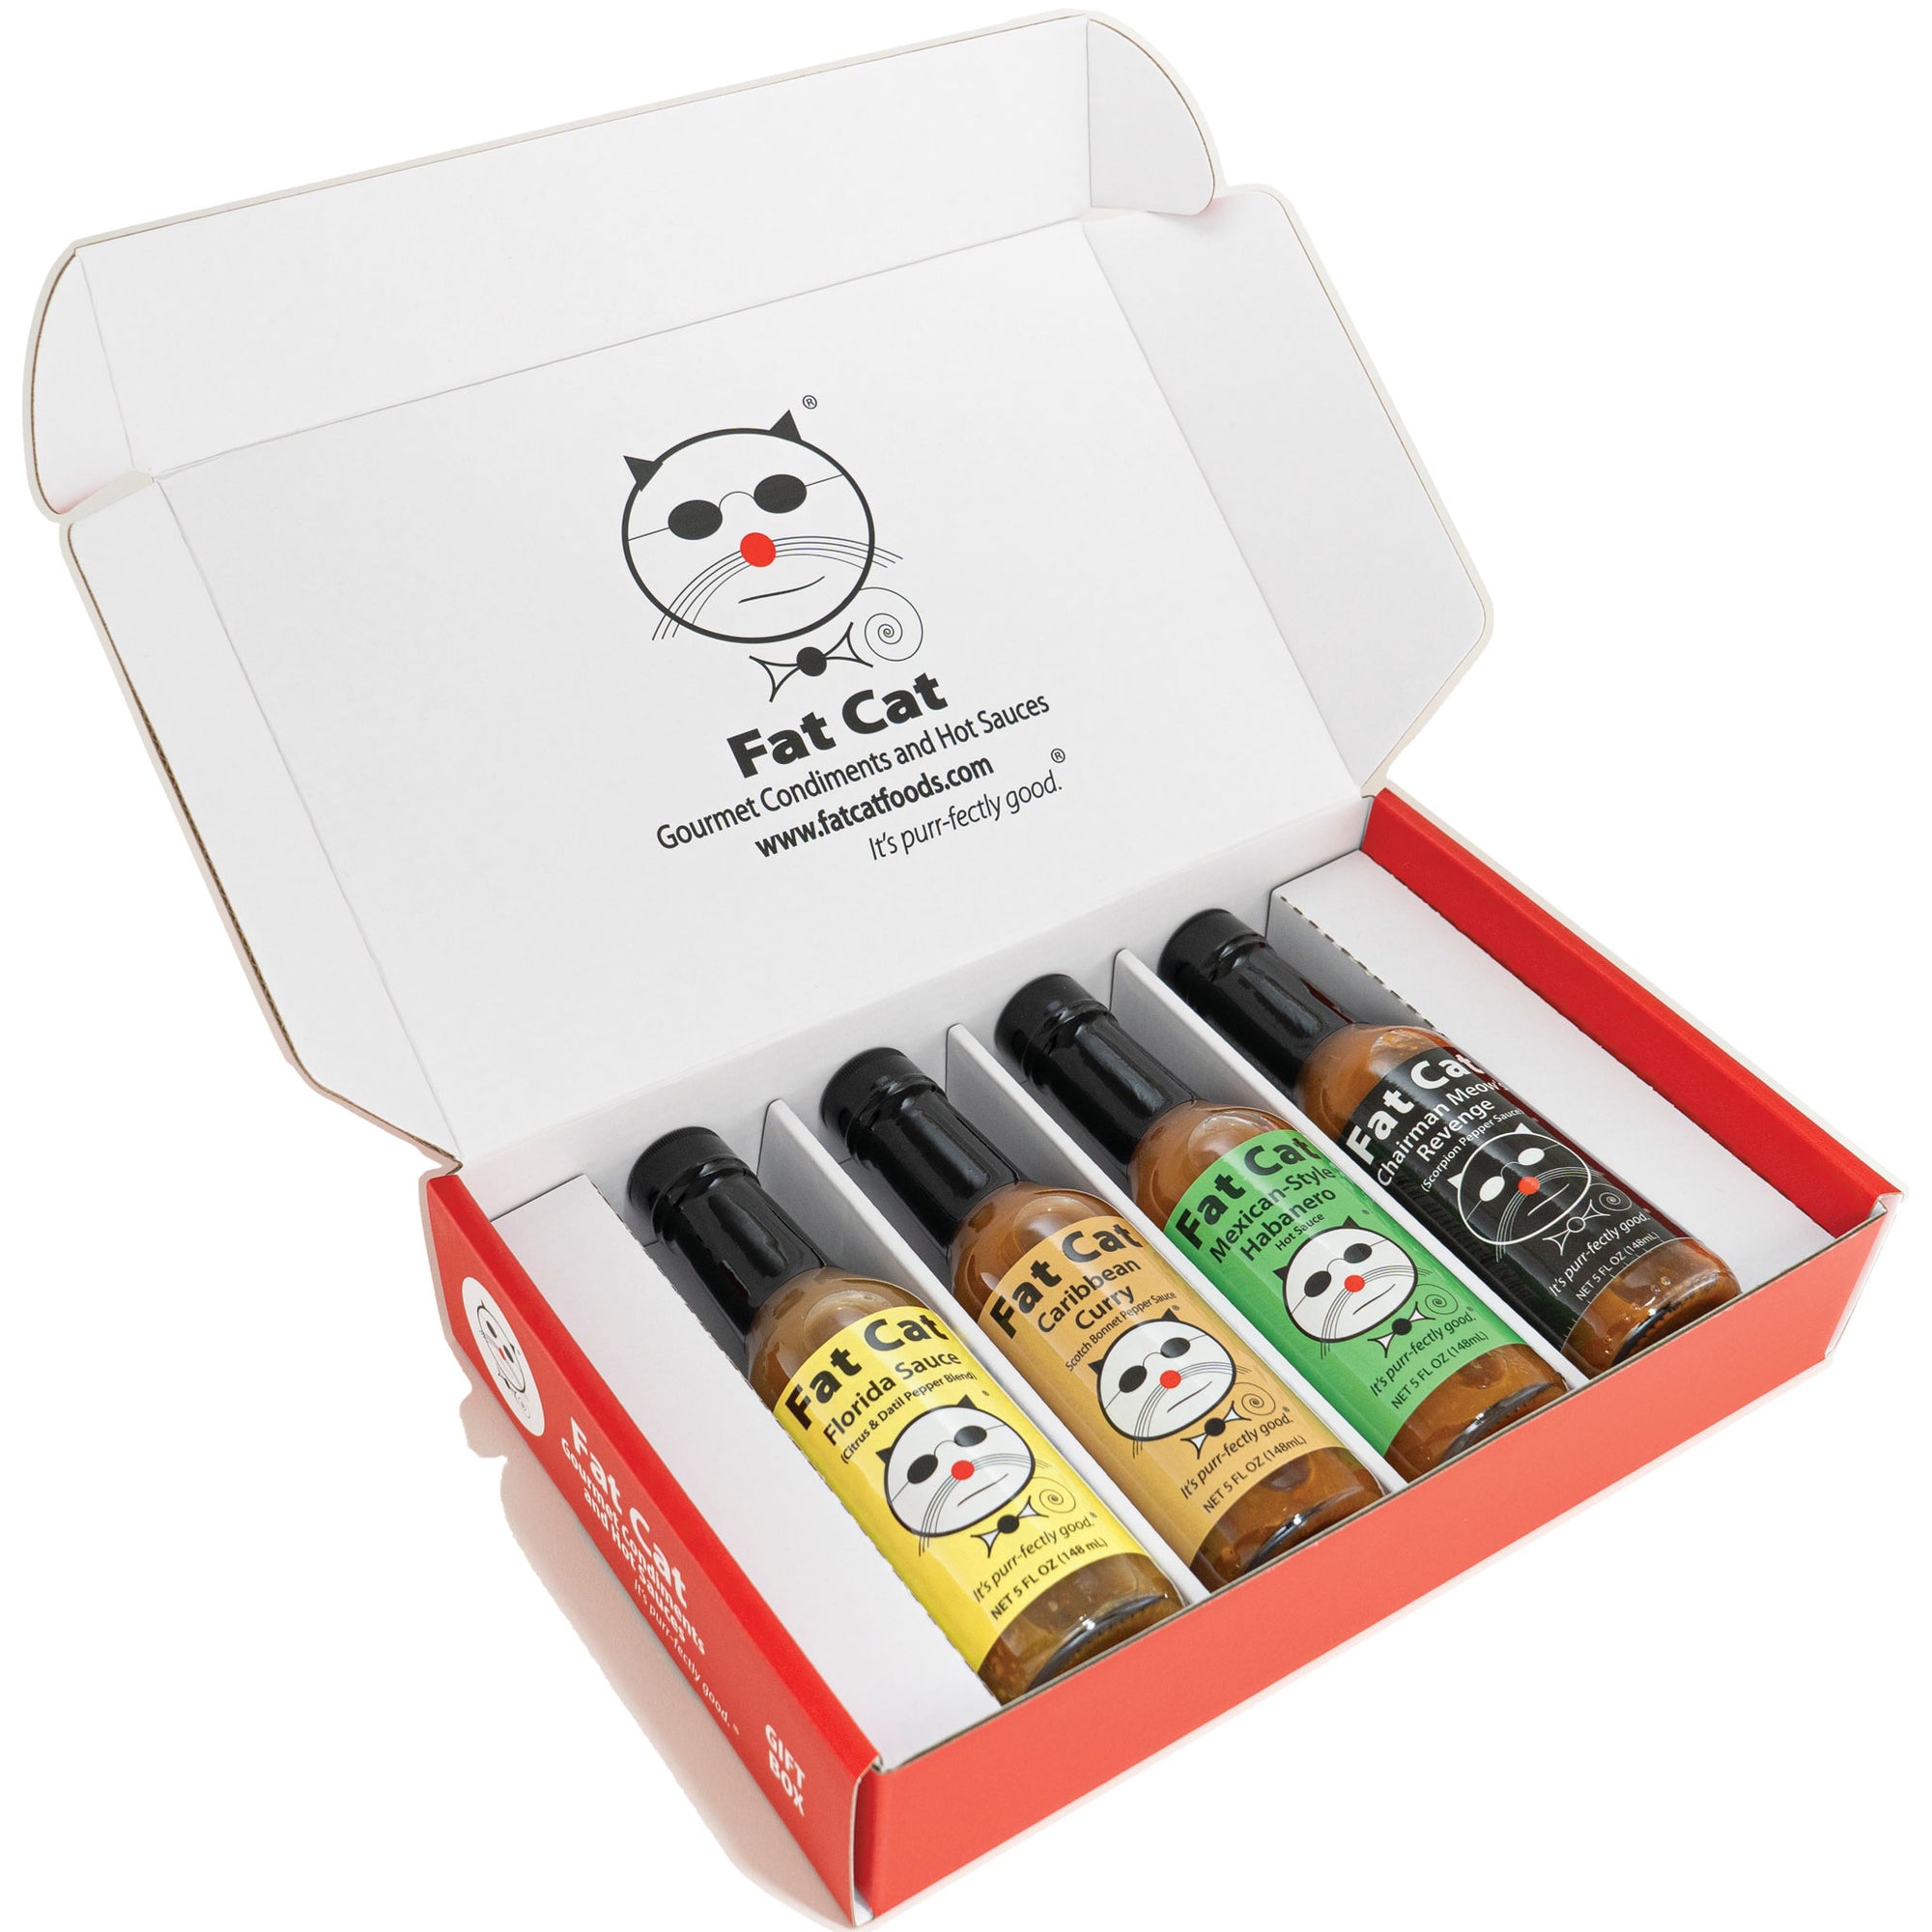 Create Your Own 4-Bottle Hot Sauce Gift Box - Fat Cat Gourmet Hot Sauce & Specialty Condiments